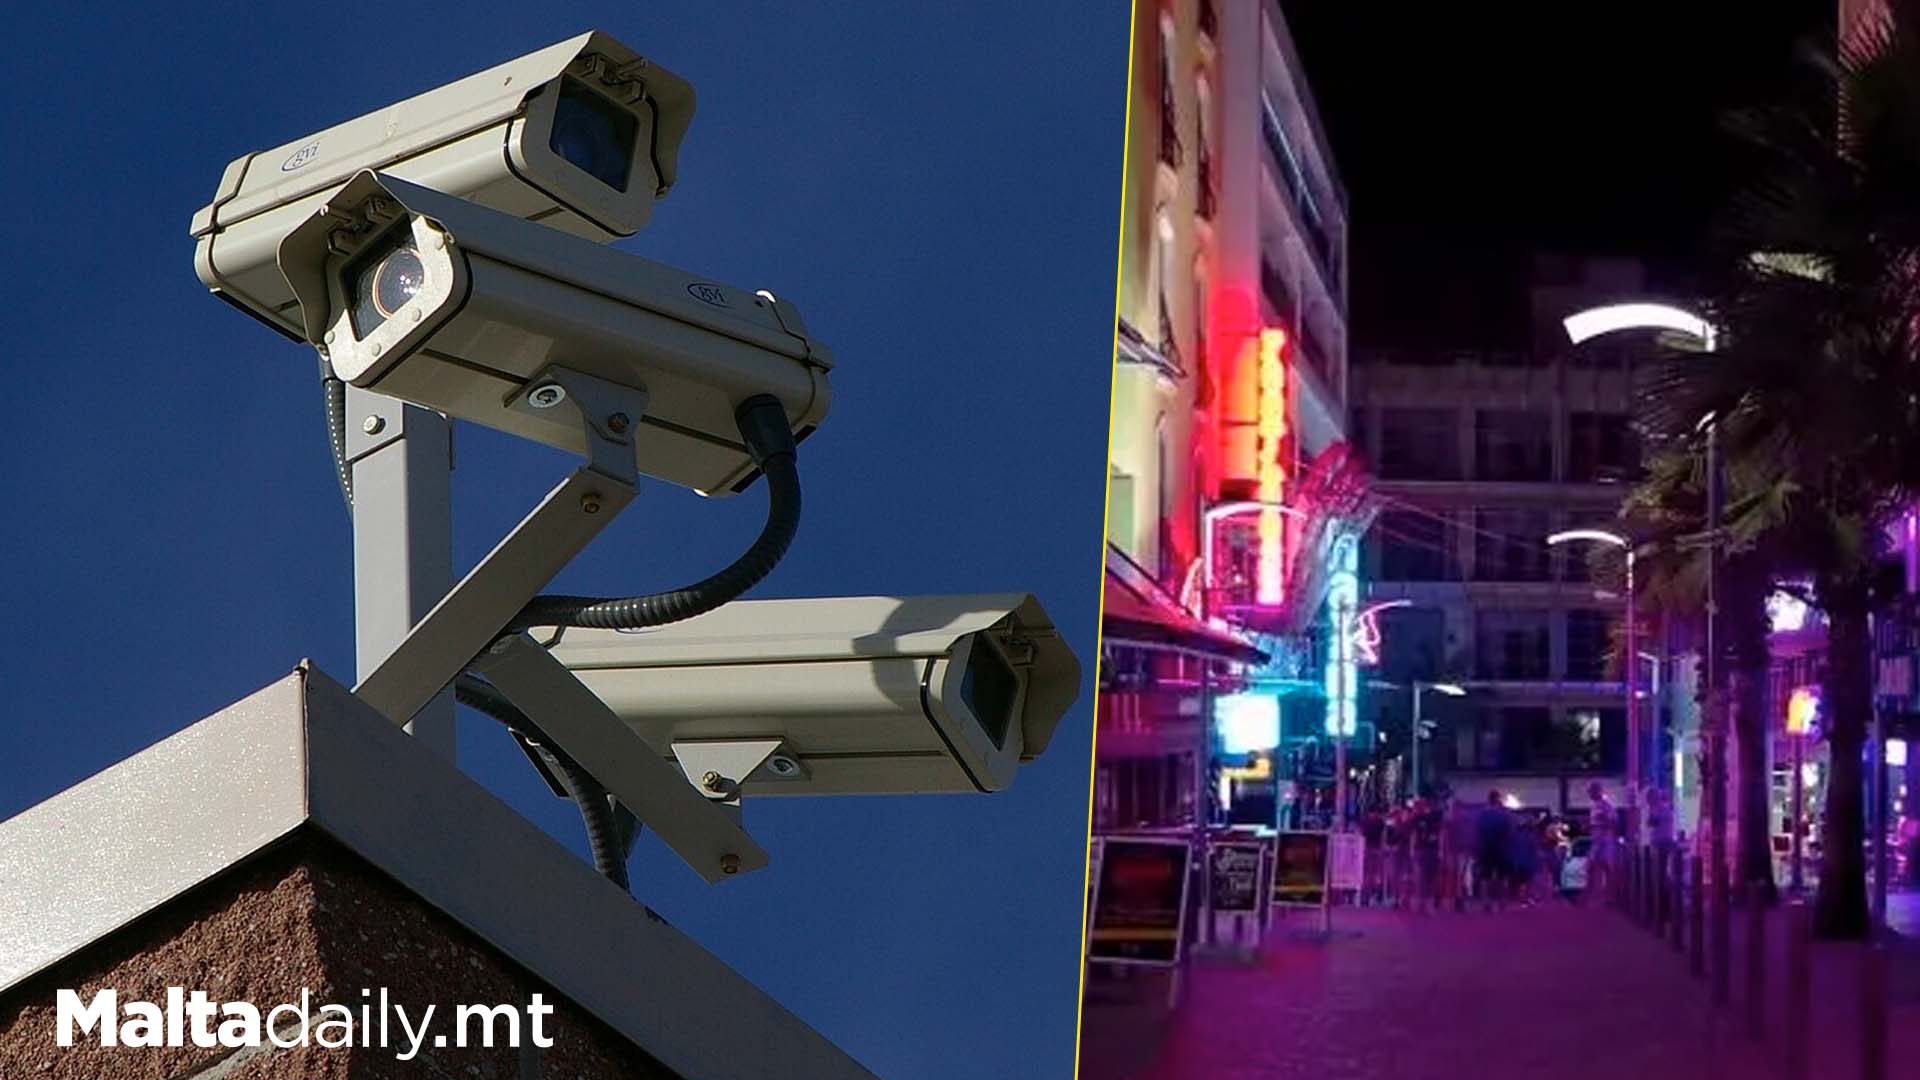 95% Of People Think Paceville Needs More CCTV Cameras